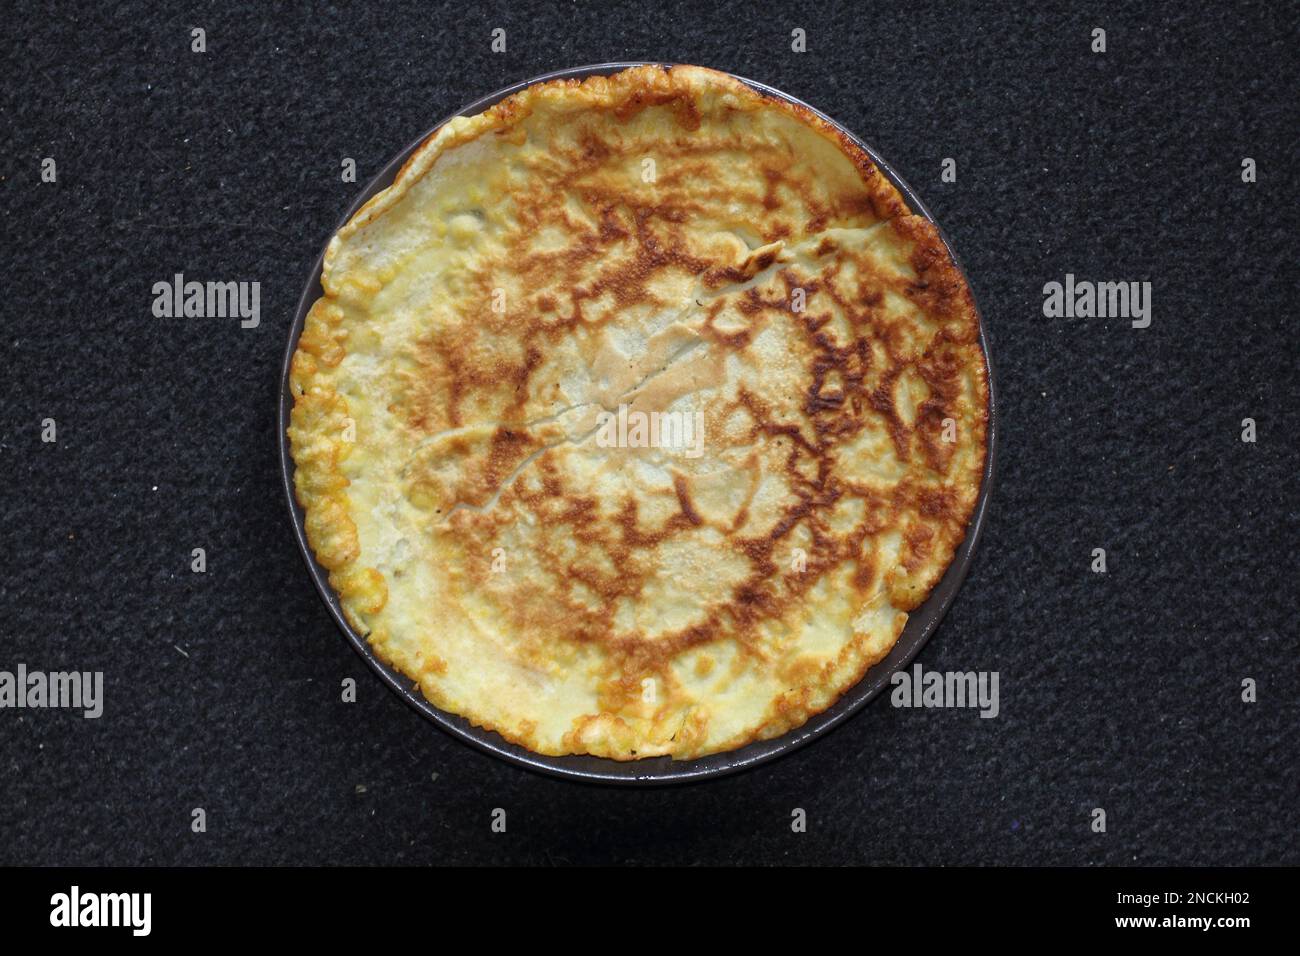 A pancake  is a flat cake, often thin and round, prepared from, a starch-based batter that may contain eggs, milk and butter and cooked on a hot surfa Stock Photo